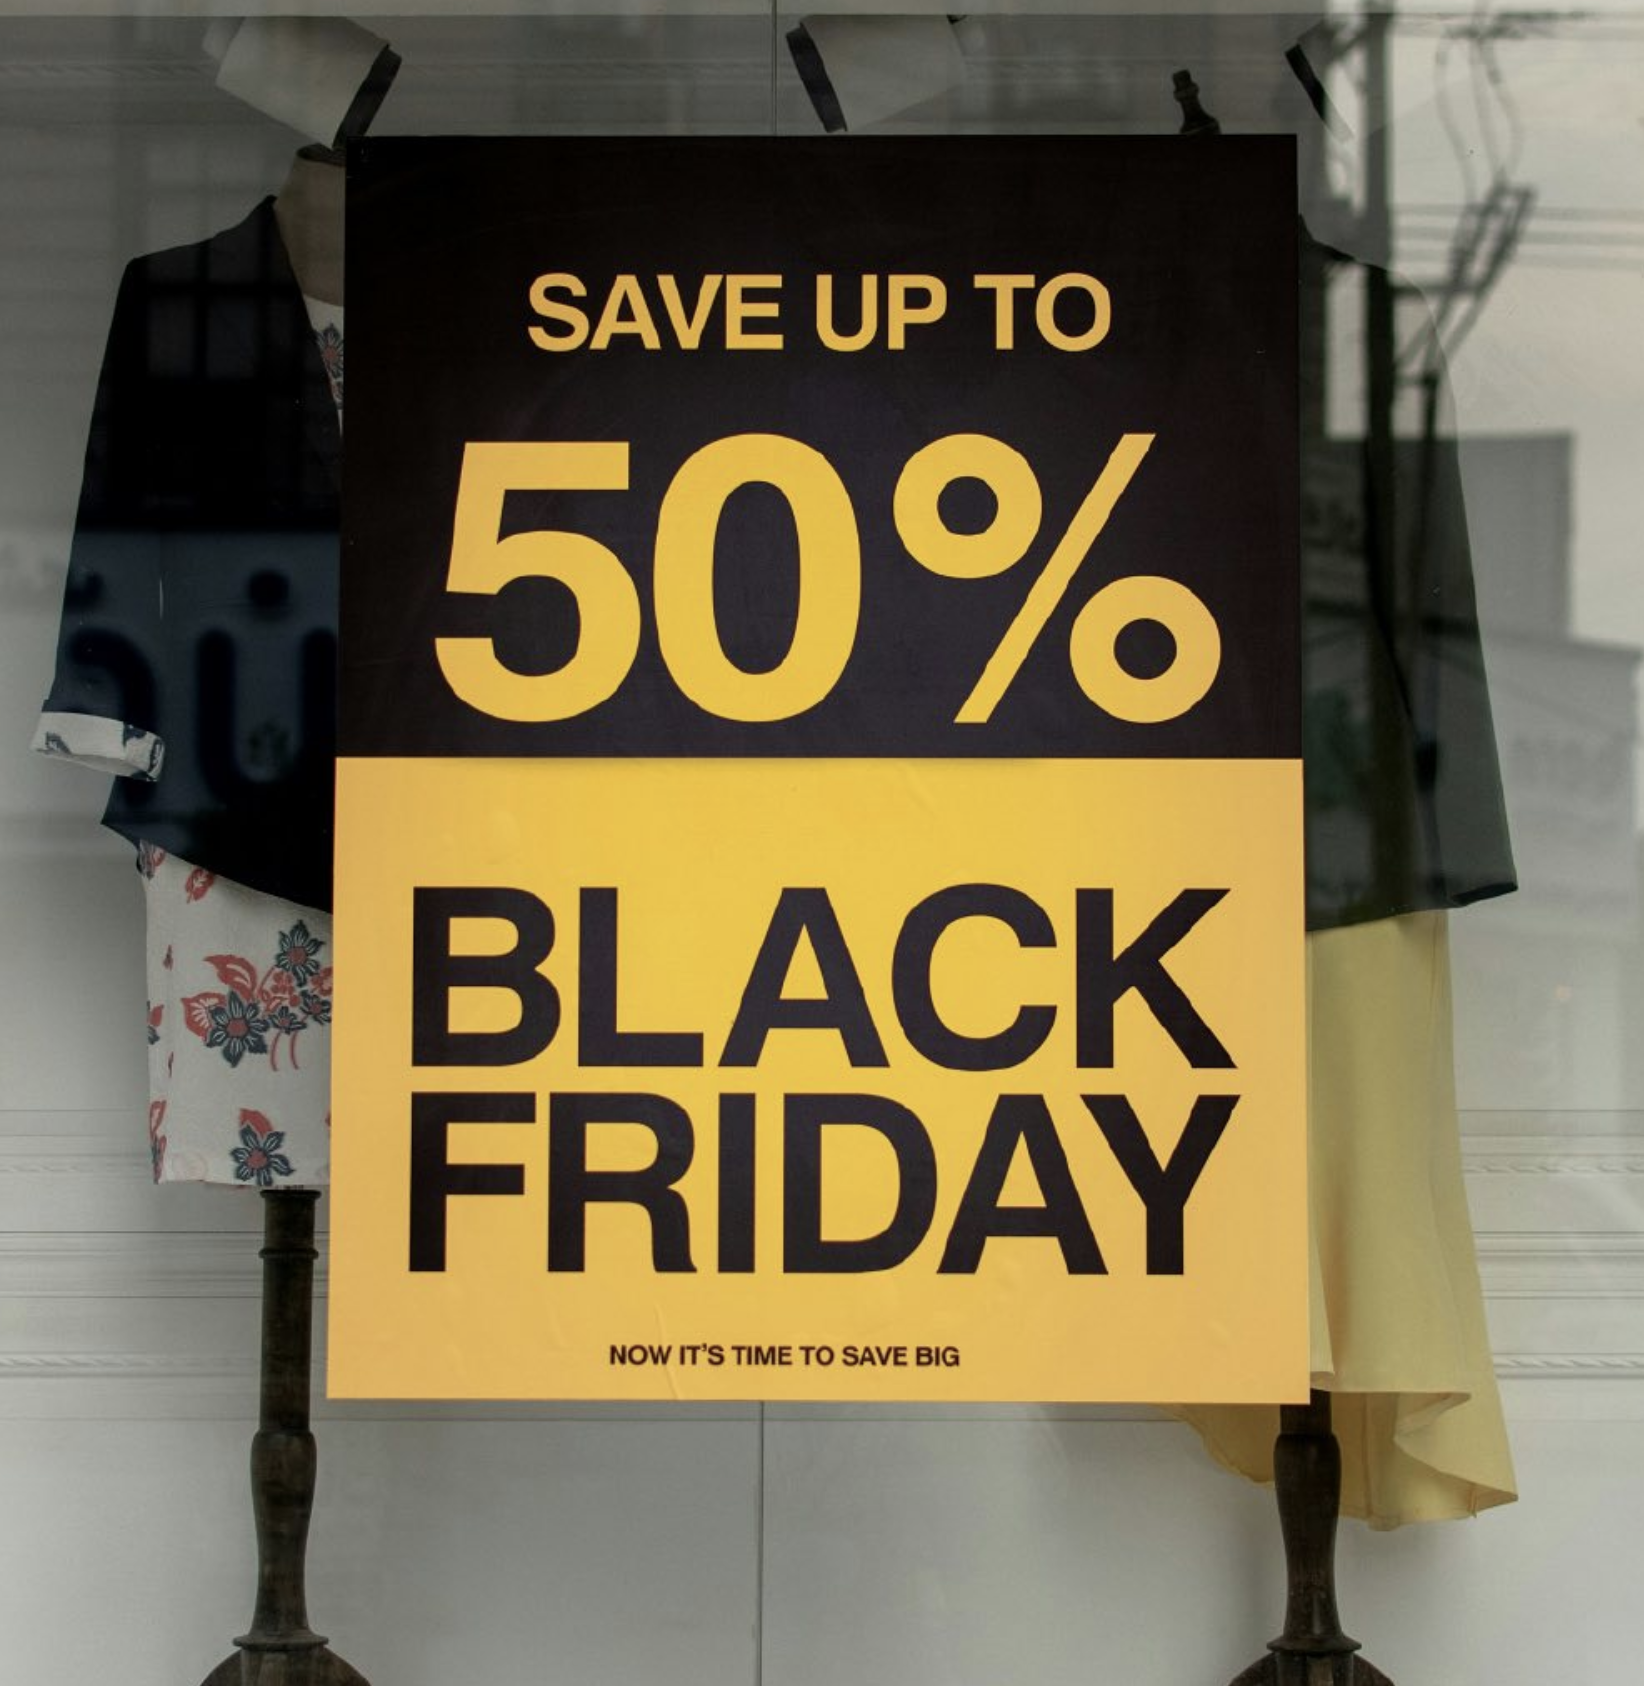 Black Friday, Consumerism, and Finding Fulfilment